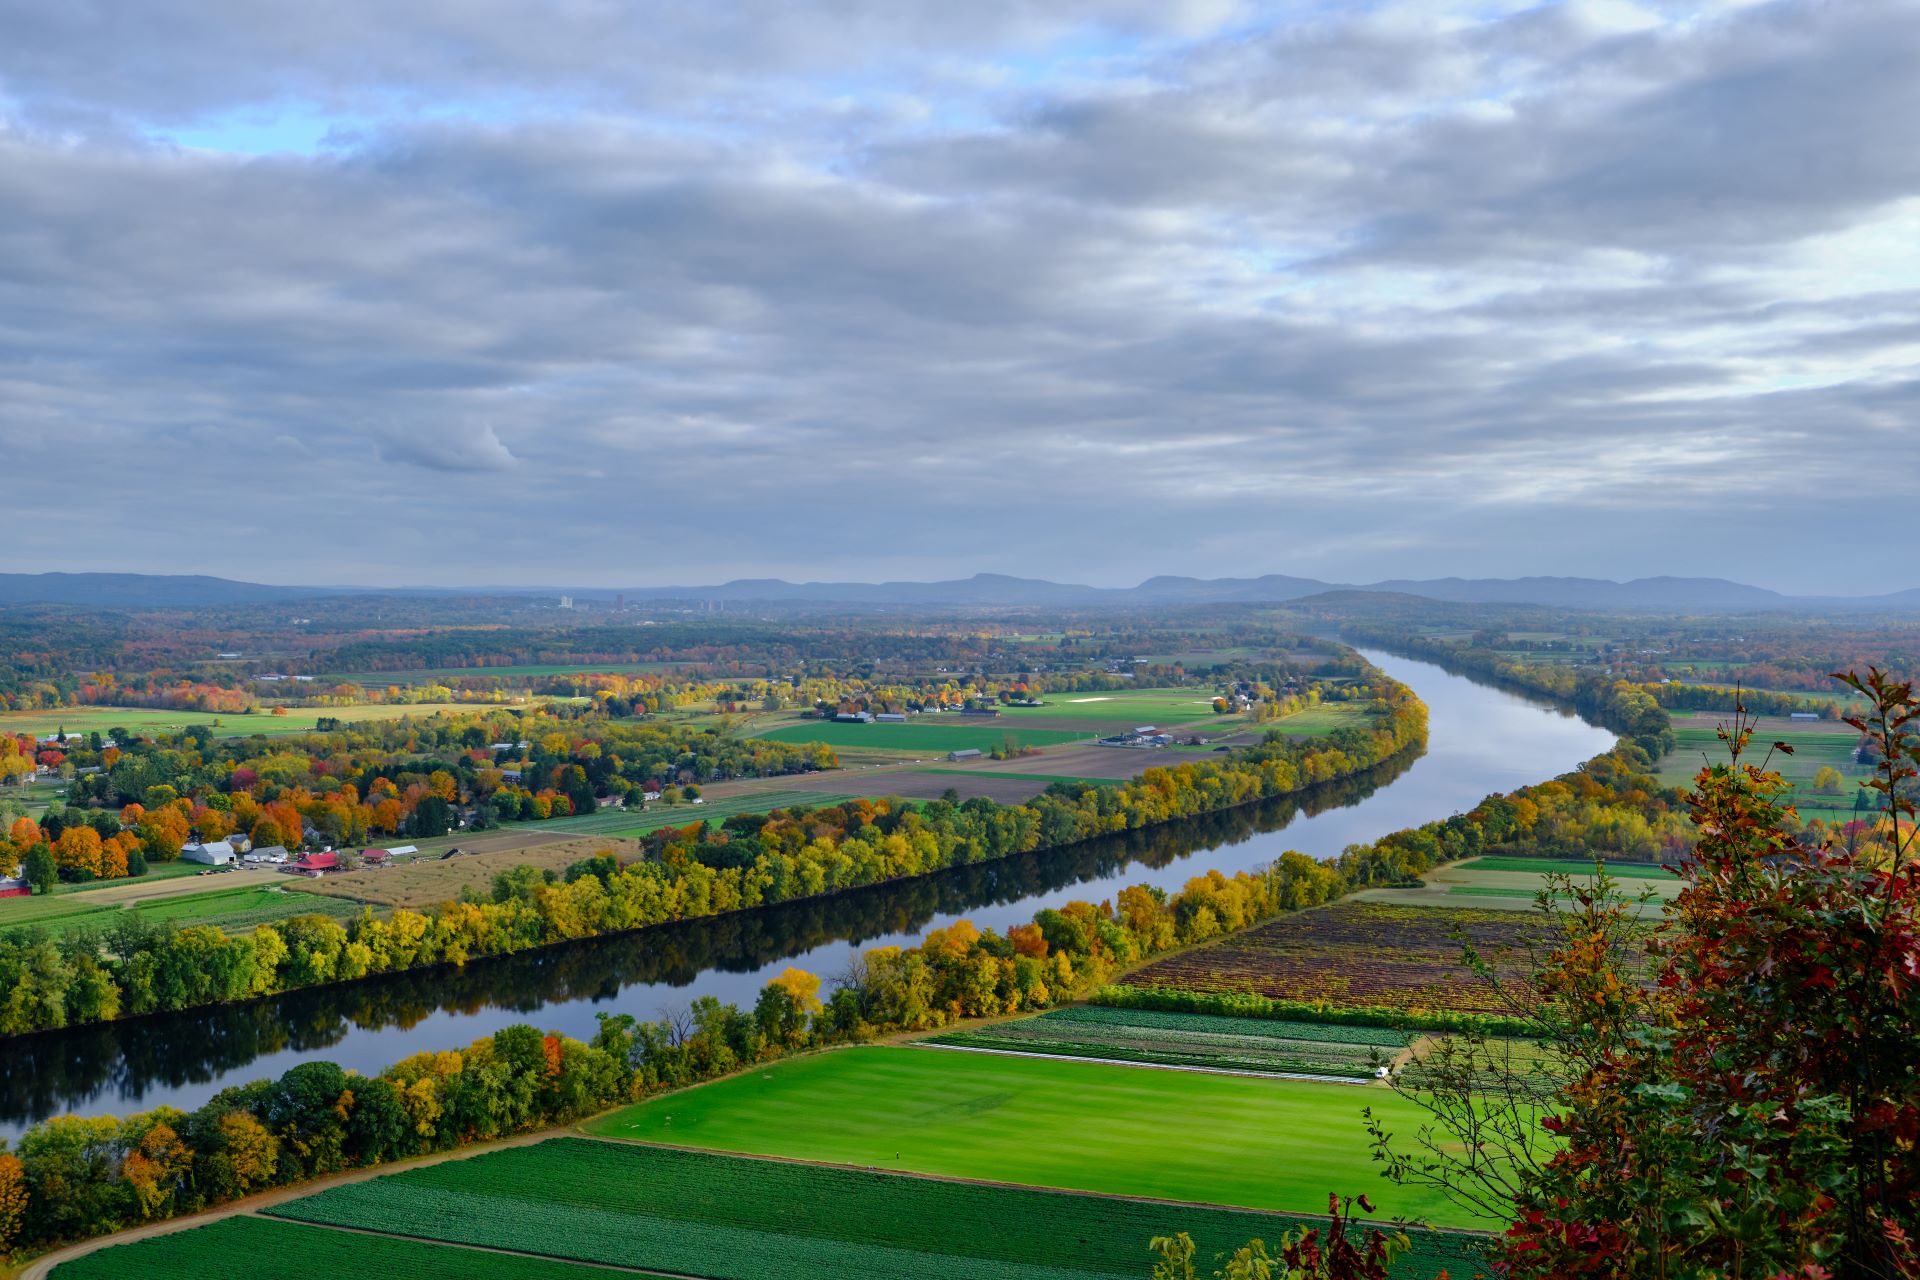 A view of the Connecticut River and adjacent farms in fall